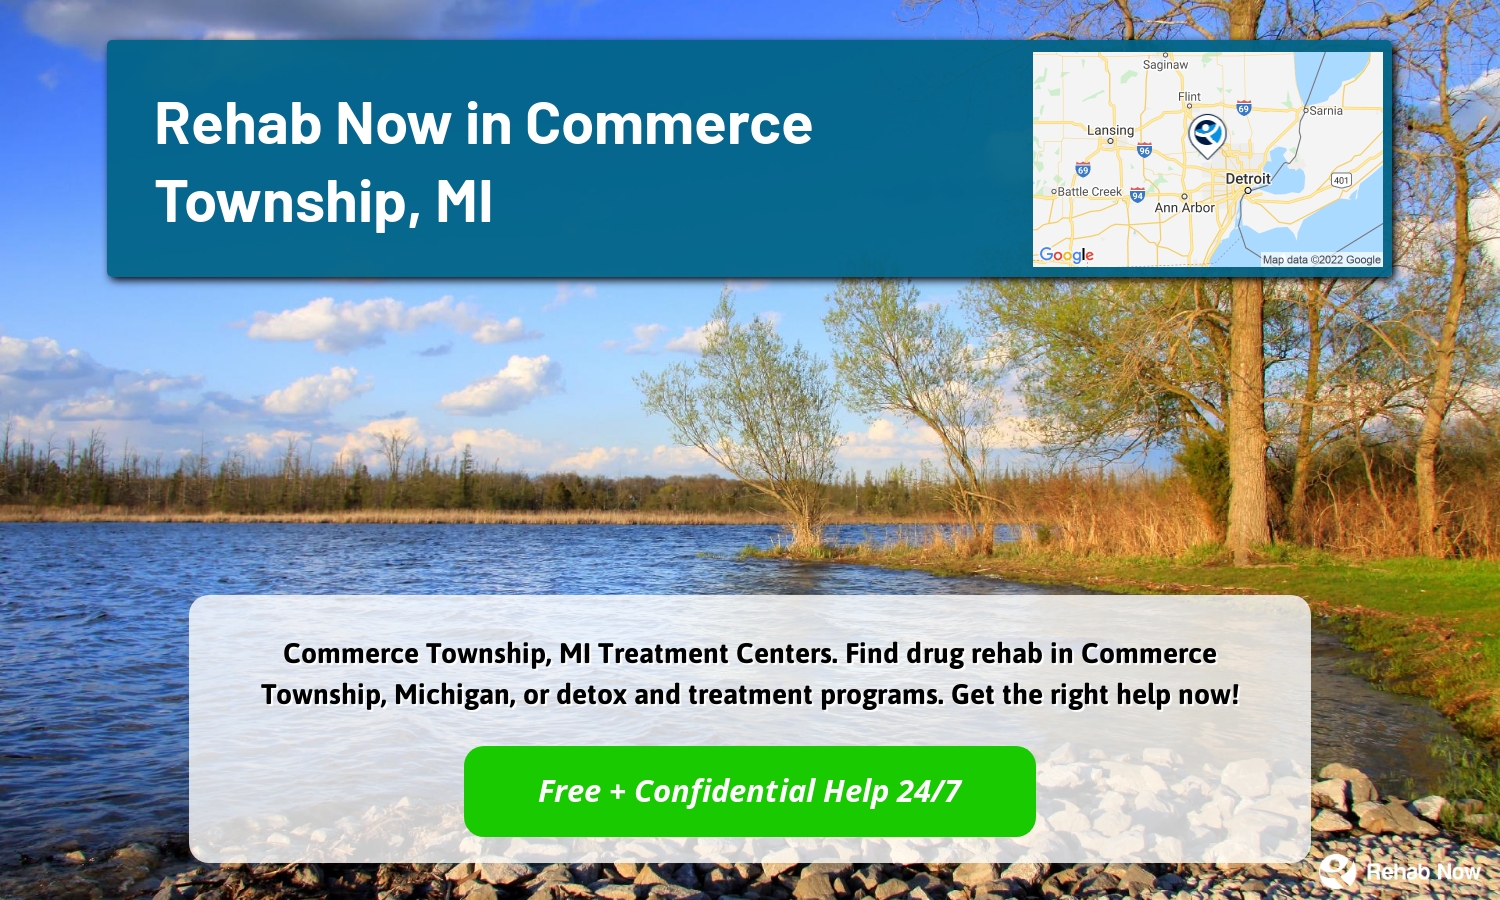 Commerce Township, MI Treatment Centers. Find drug rehab in Commerce Township, Michigan, or detox and treatment programs. Get the right help now!